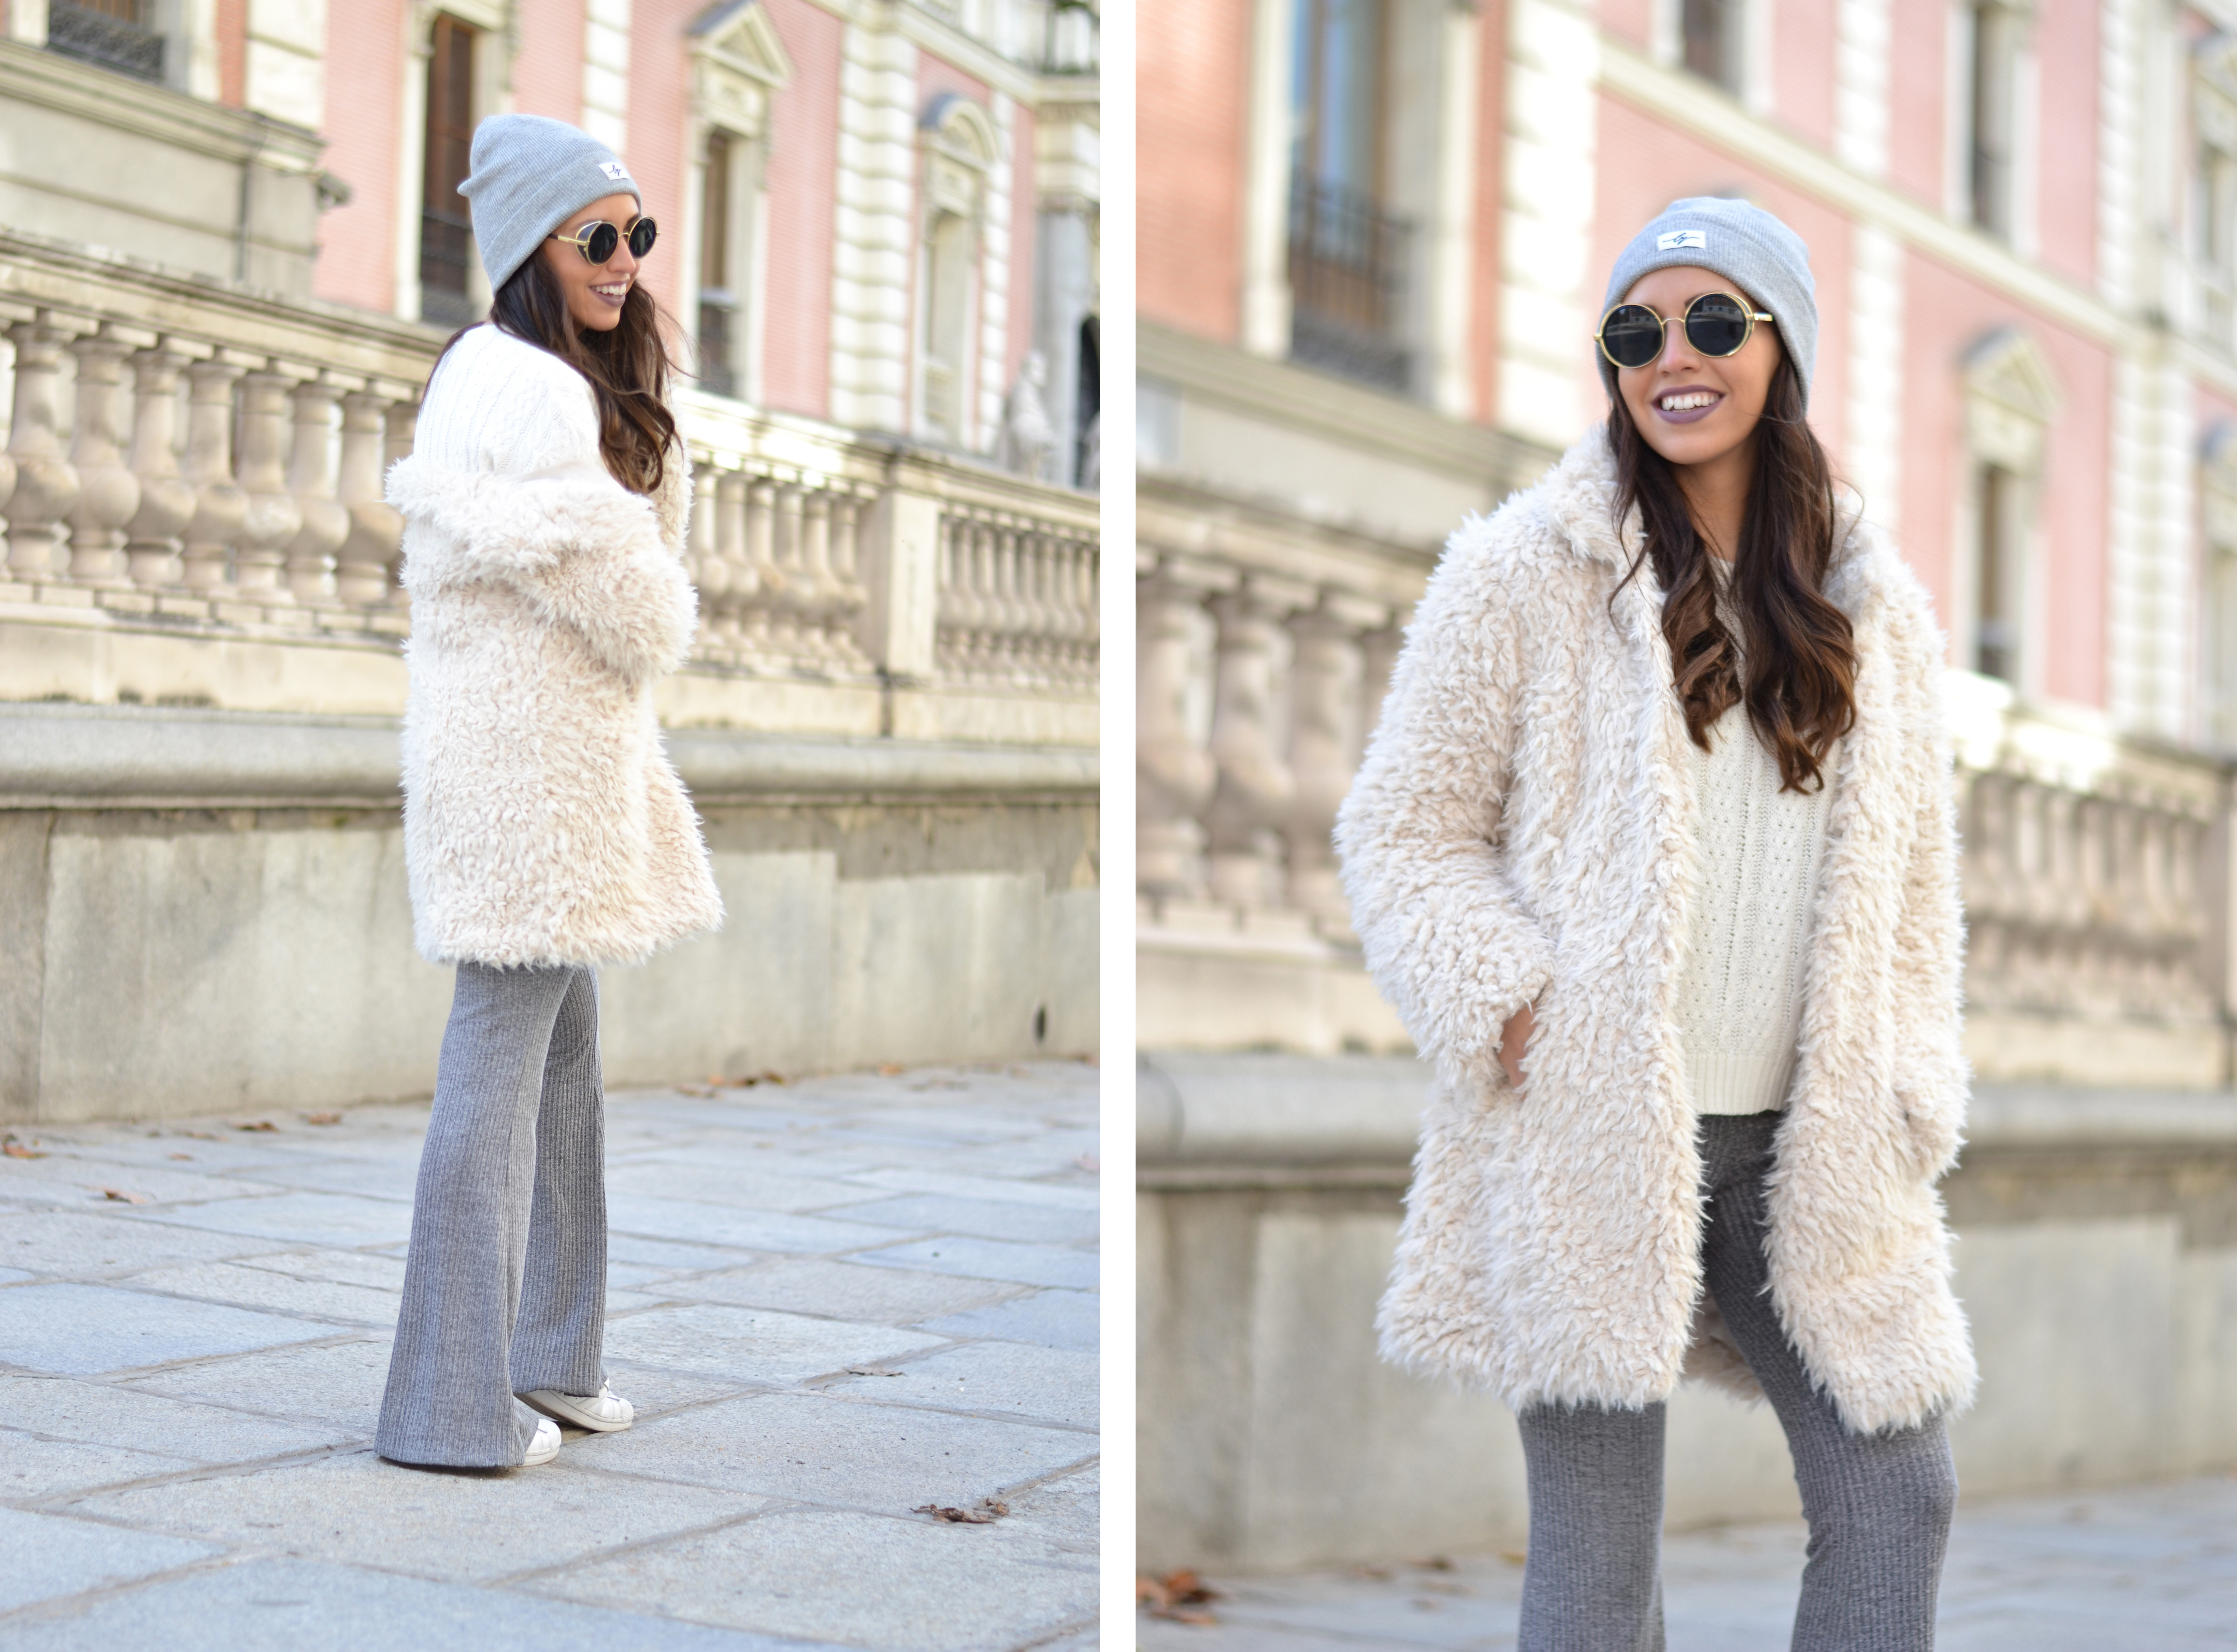 Warm white coat: Winter outfit